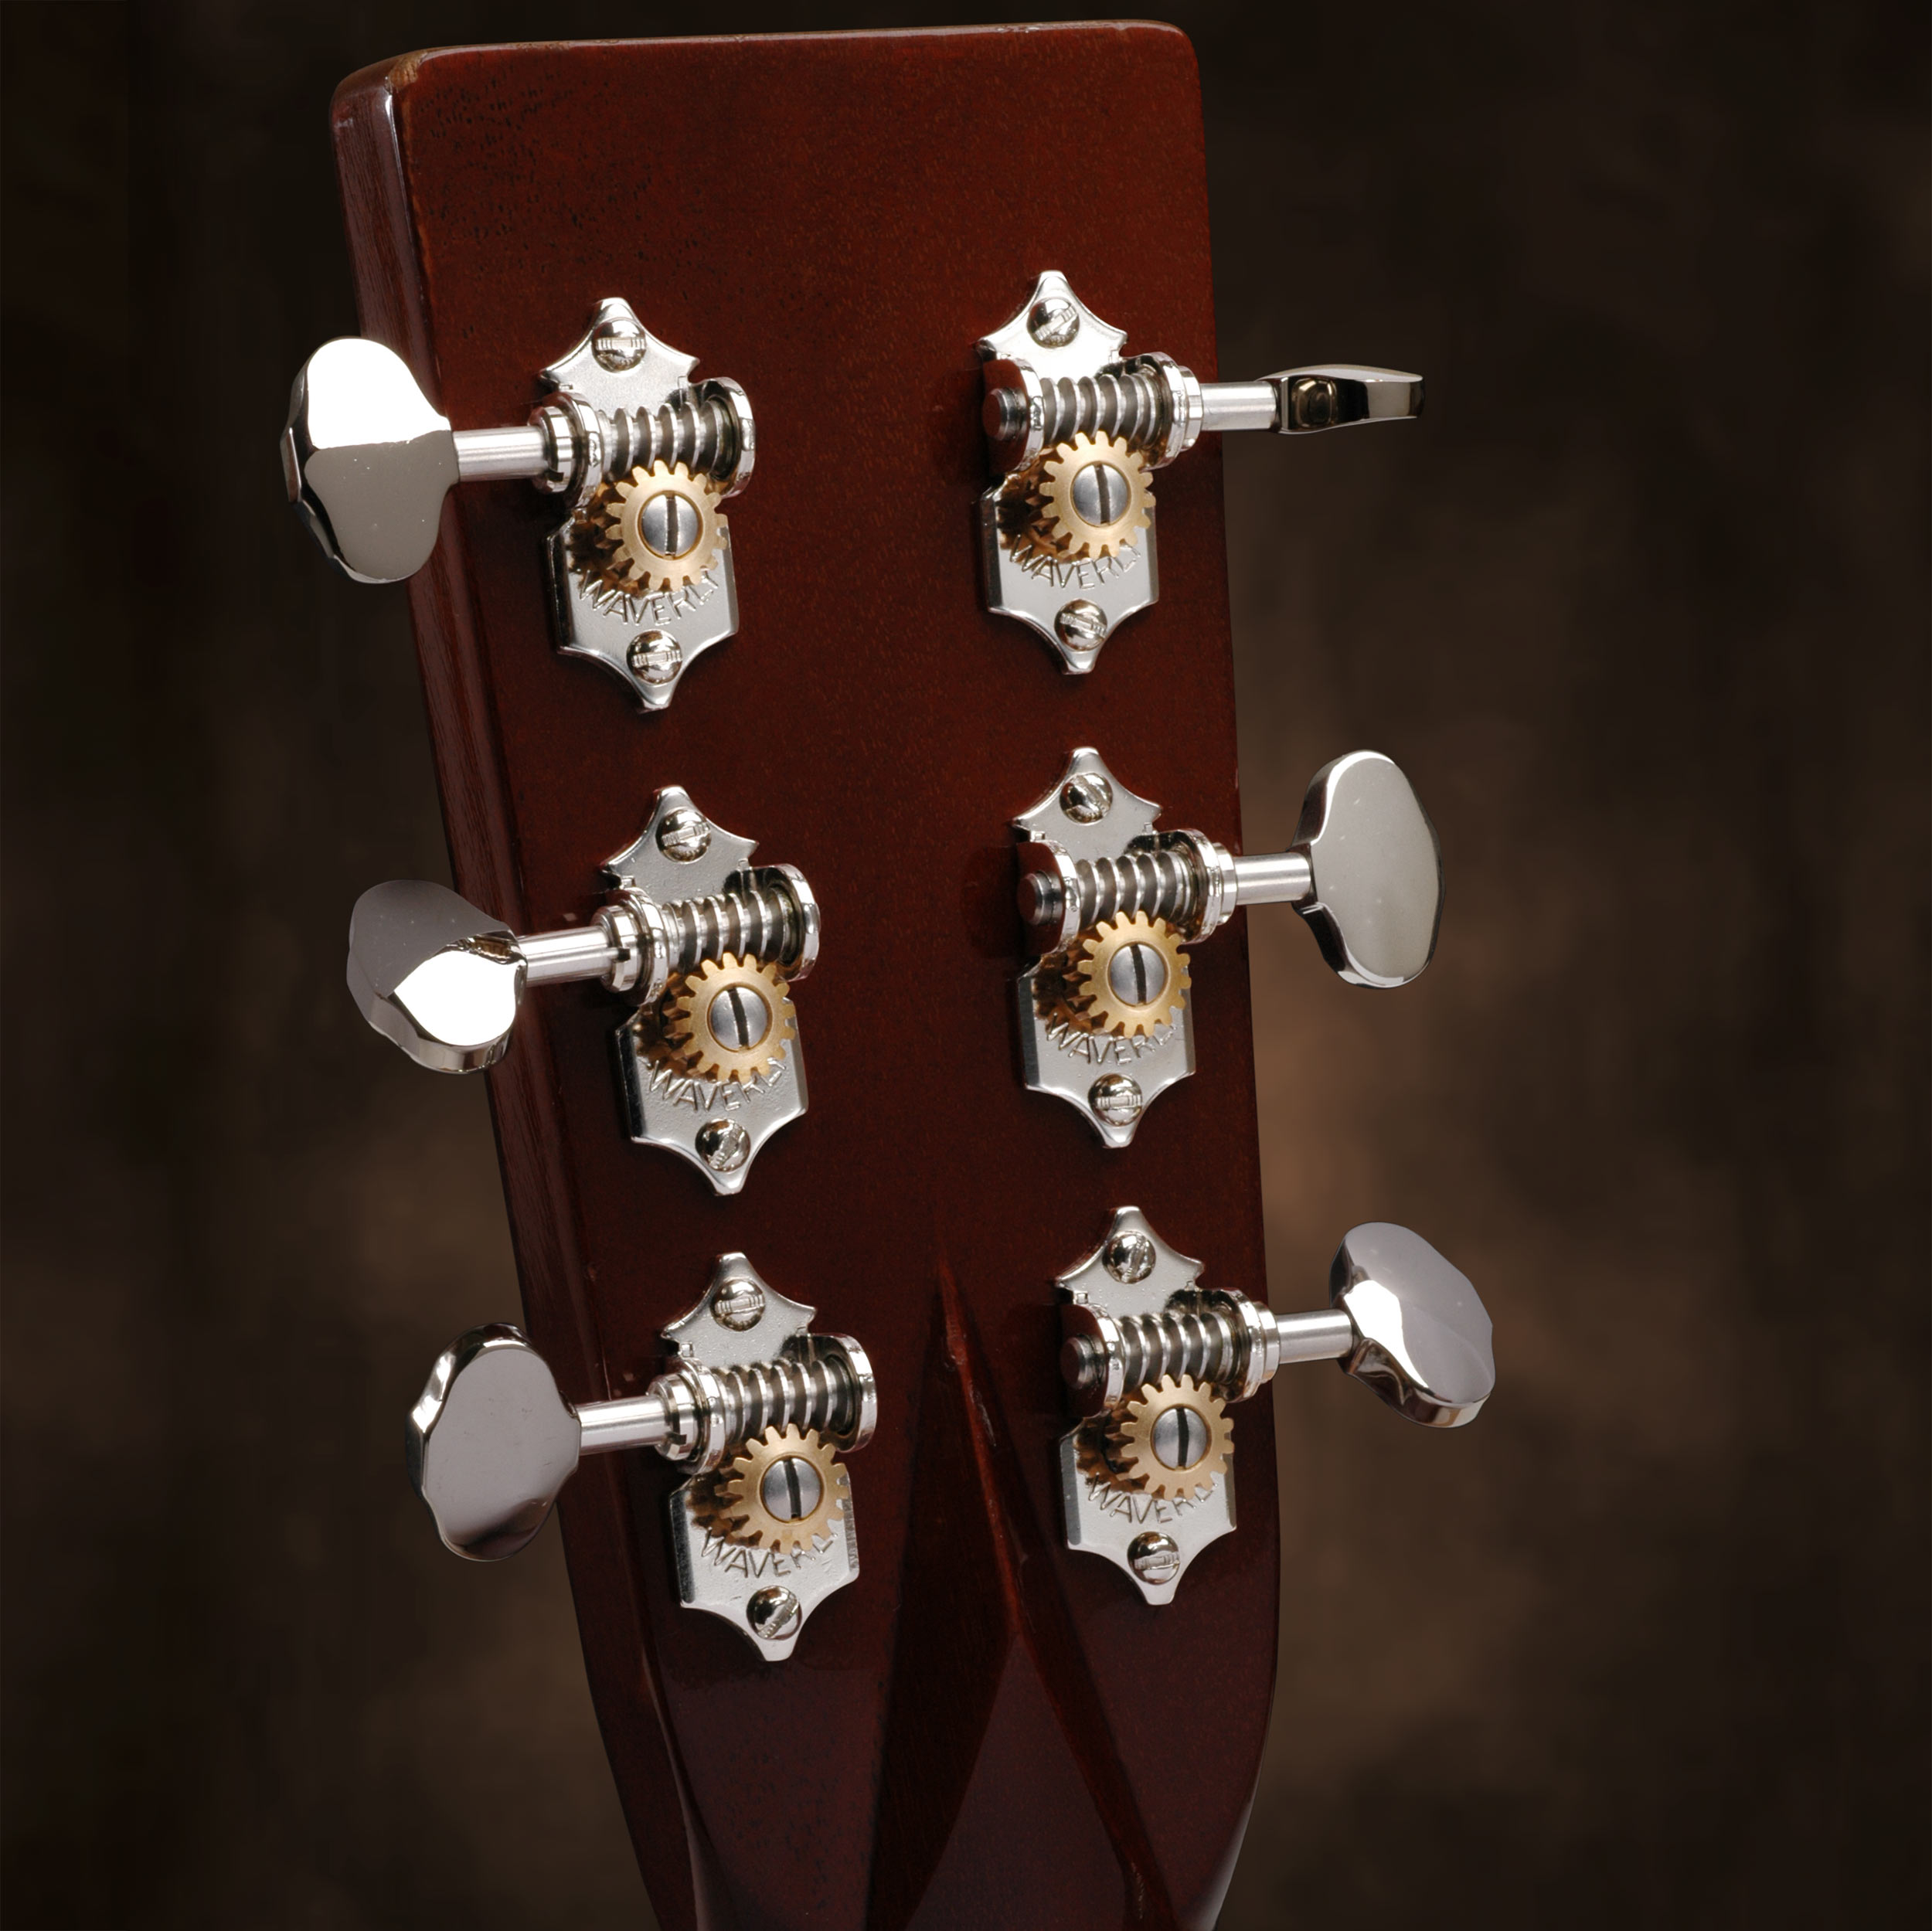 Waverly guitar tuners with ebony knobs